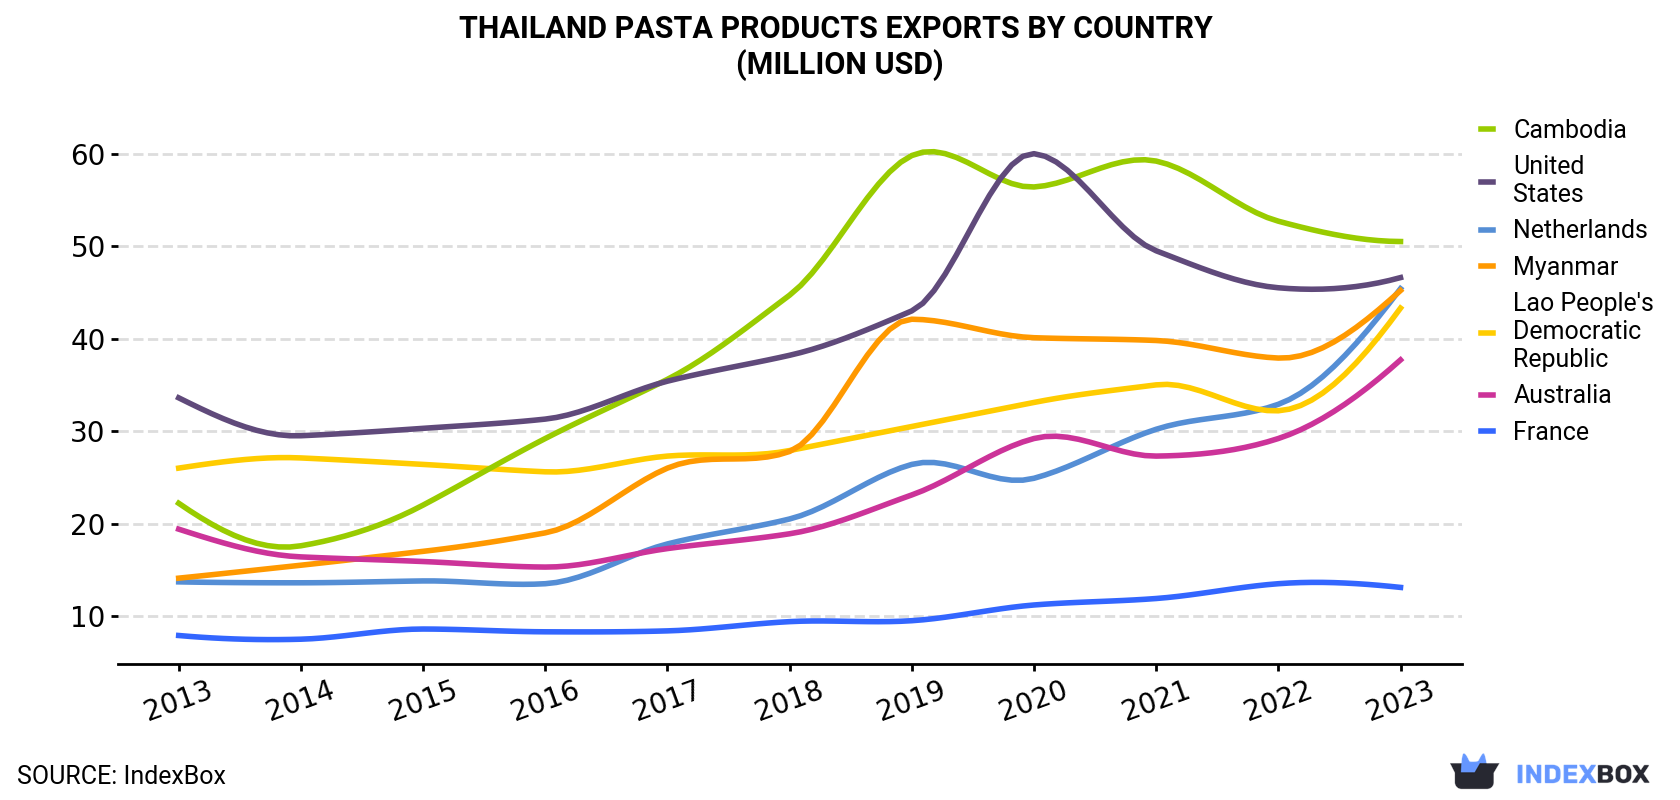 Thailand Pasta Products Exports By Country (Million USD)